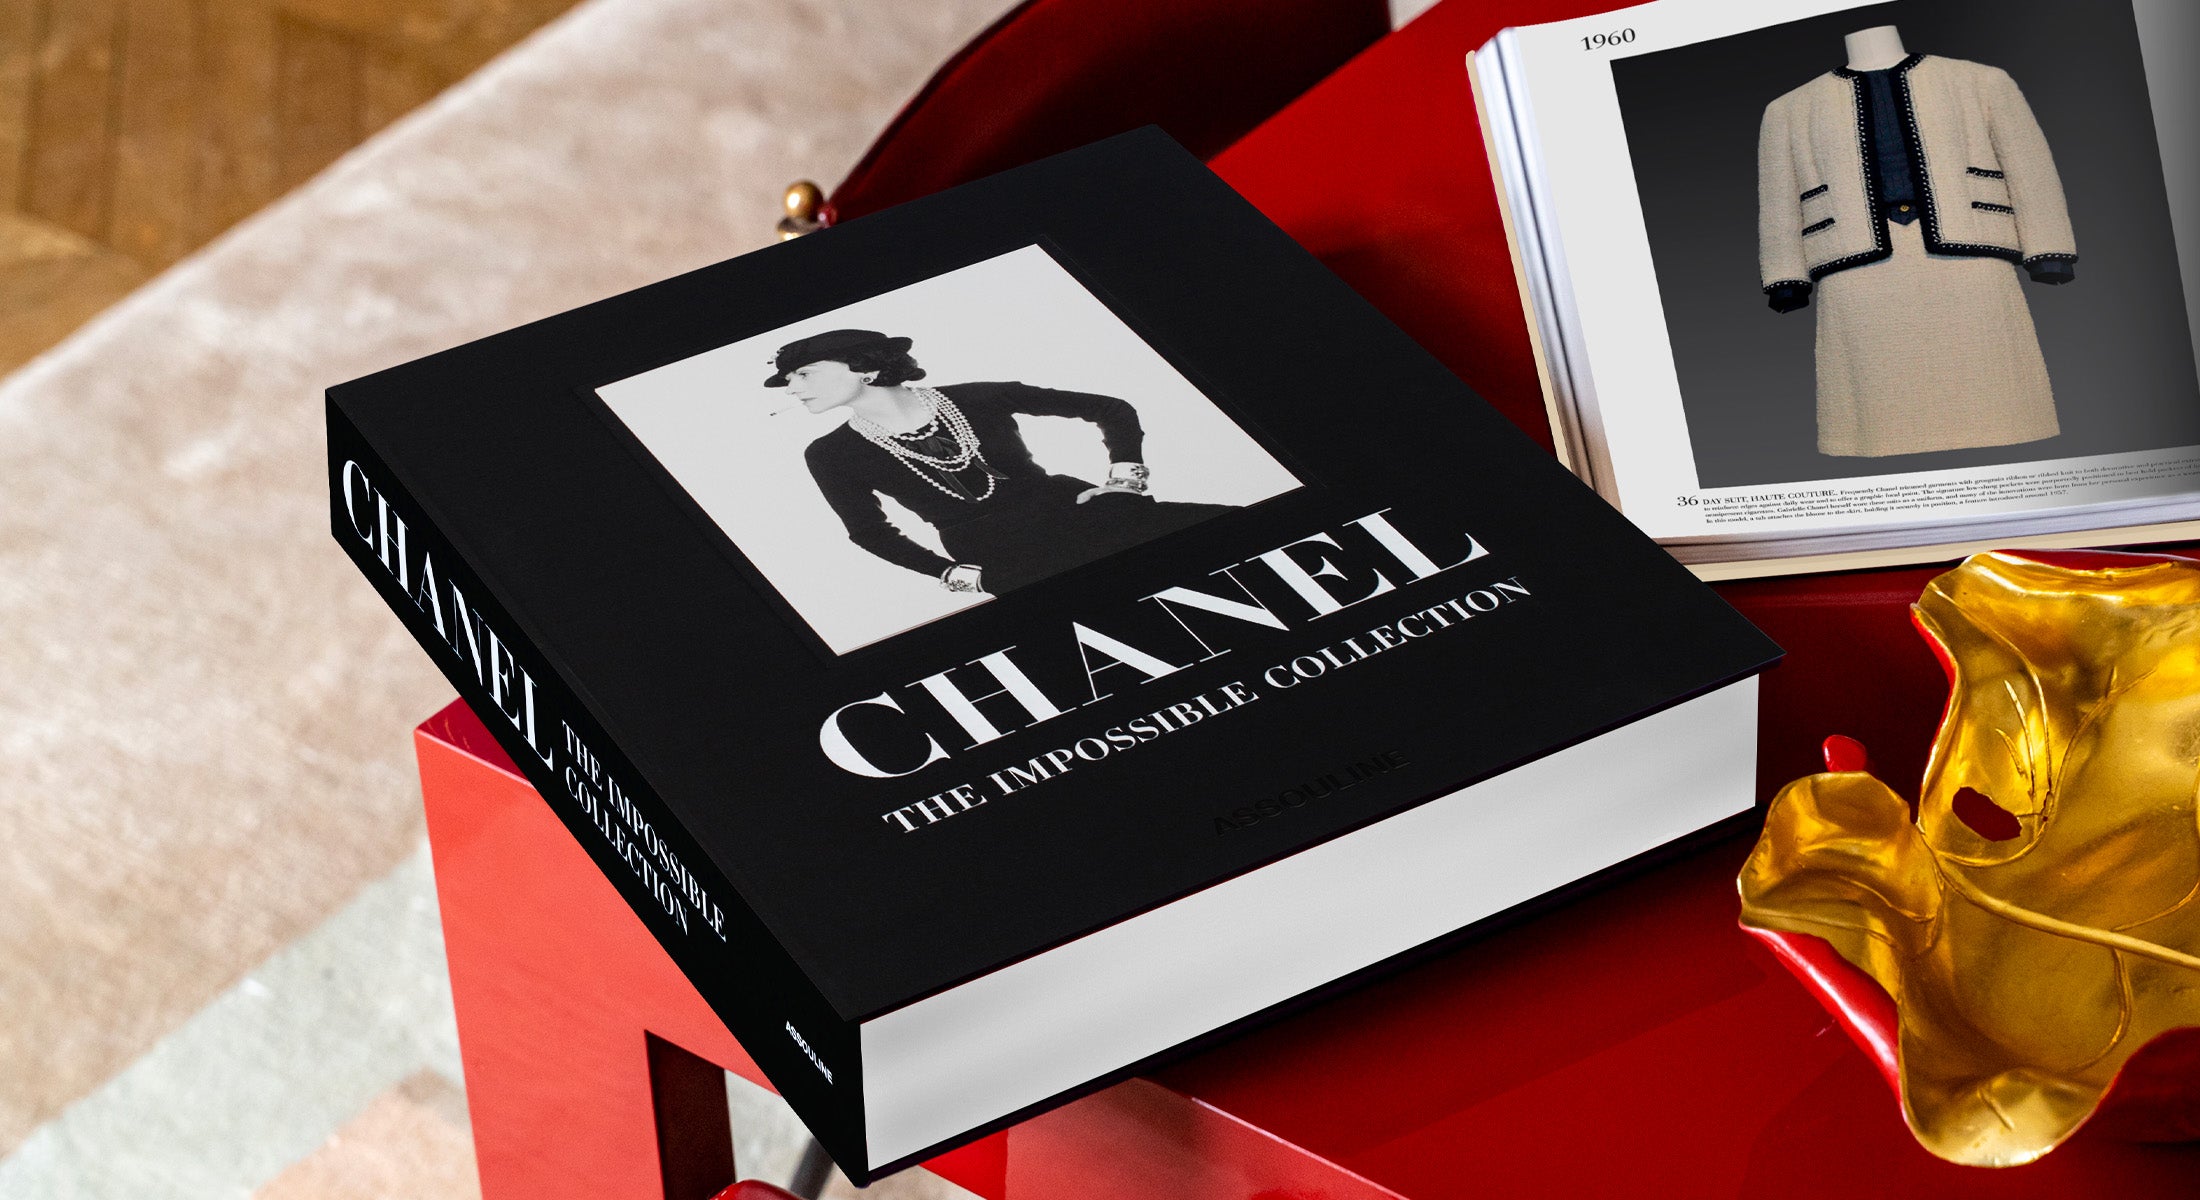 Chanel: The Impossible Collection book by Alexander Fury | ASSOULINE